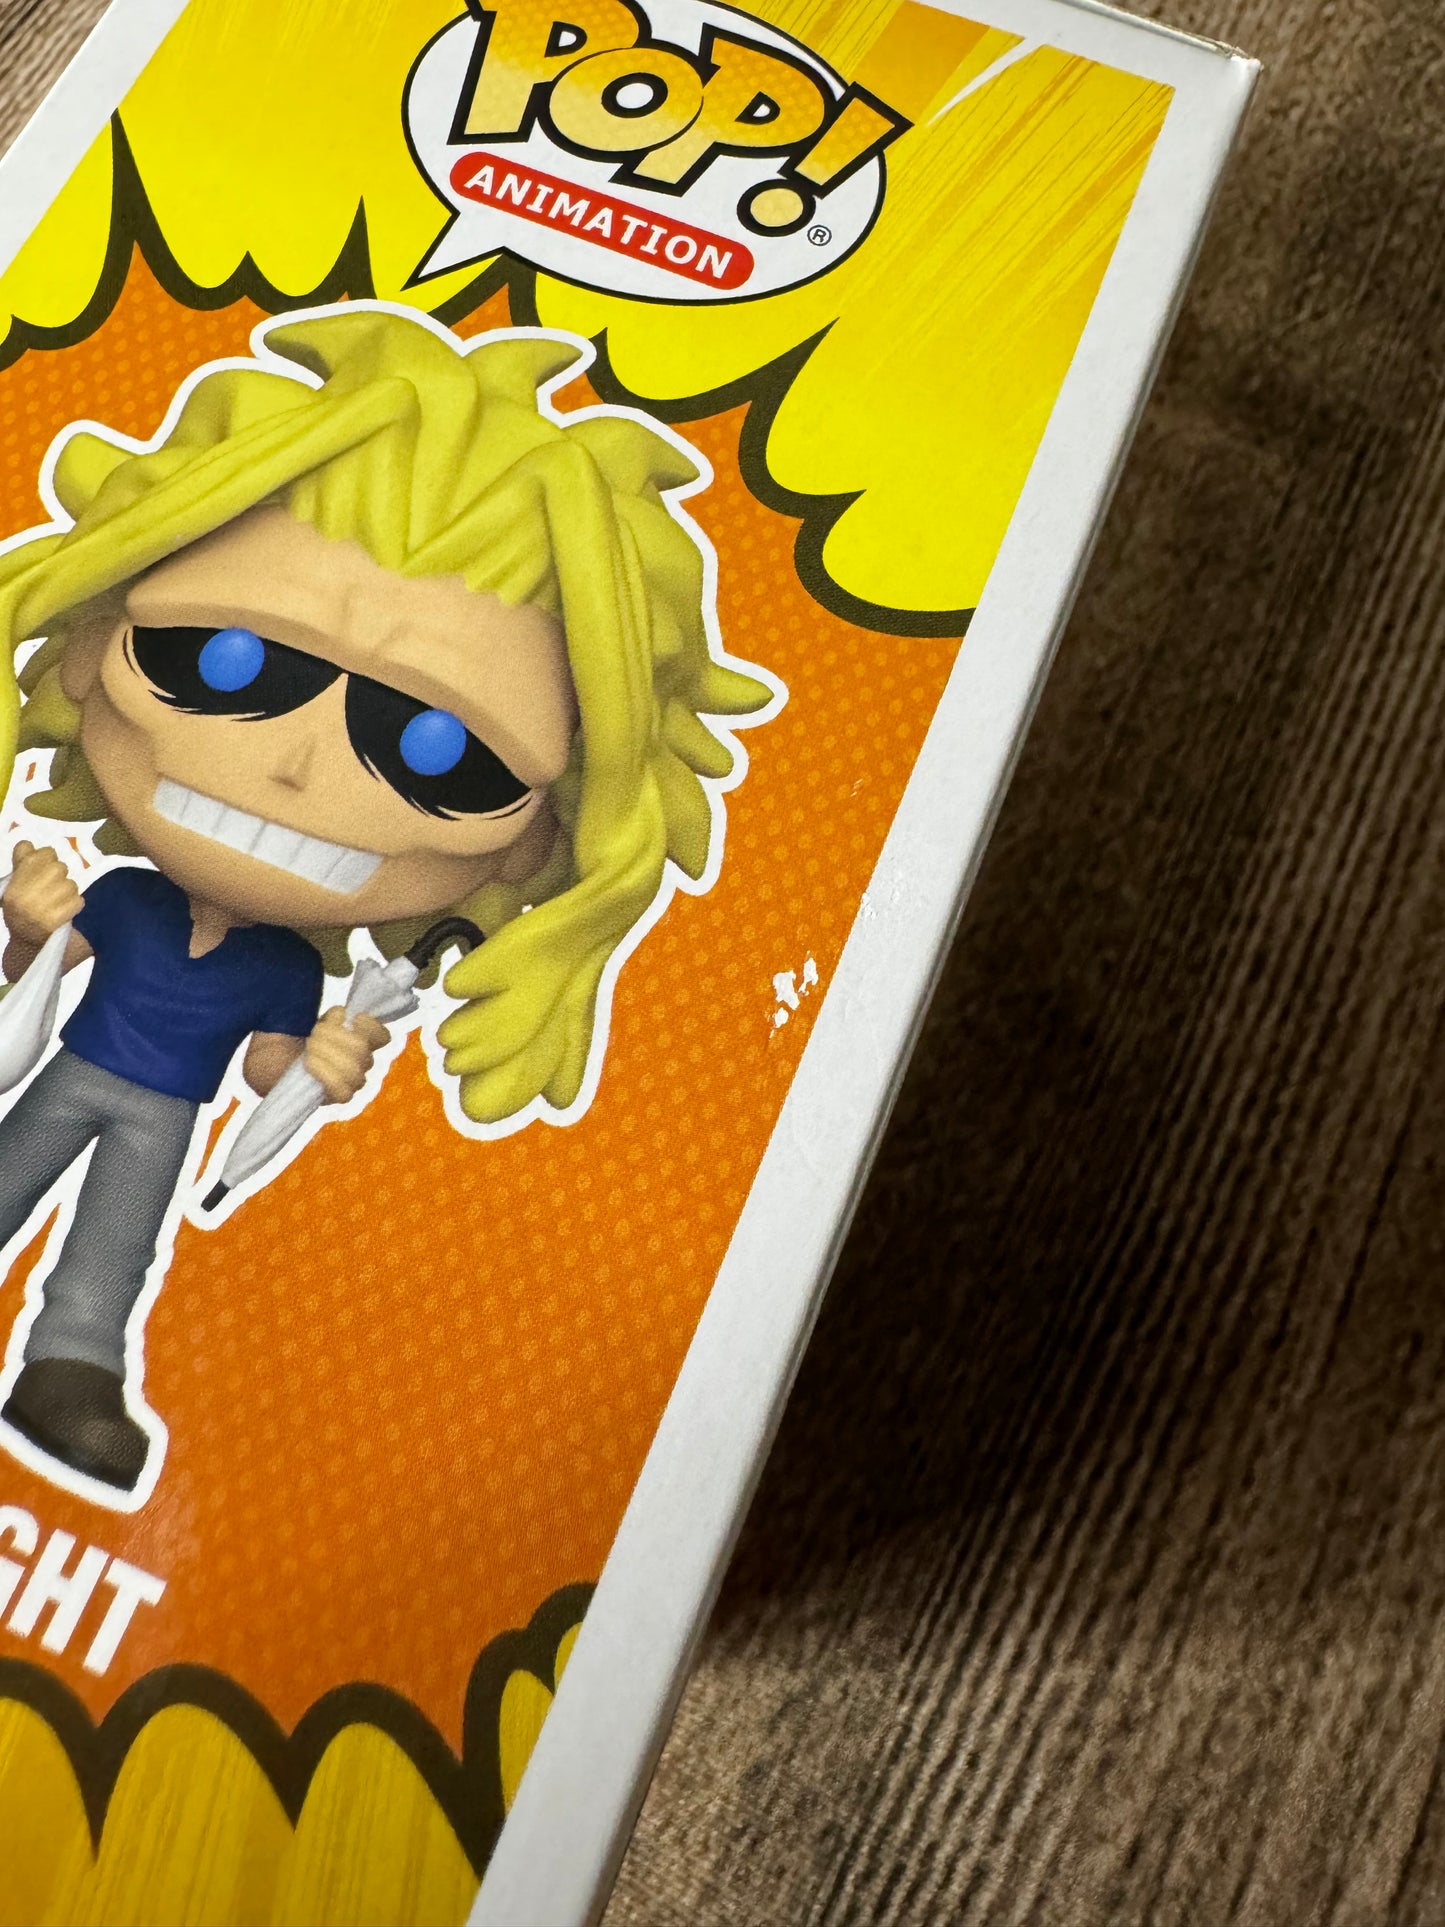 All Might: 2021 Fall Convention Exclusive Funko Pop